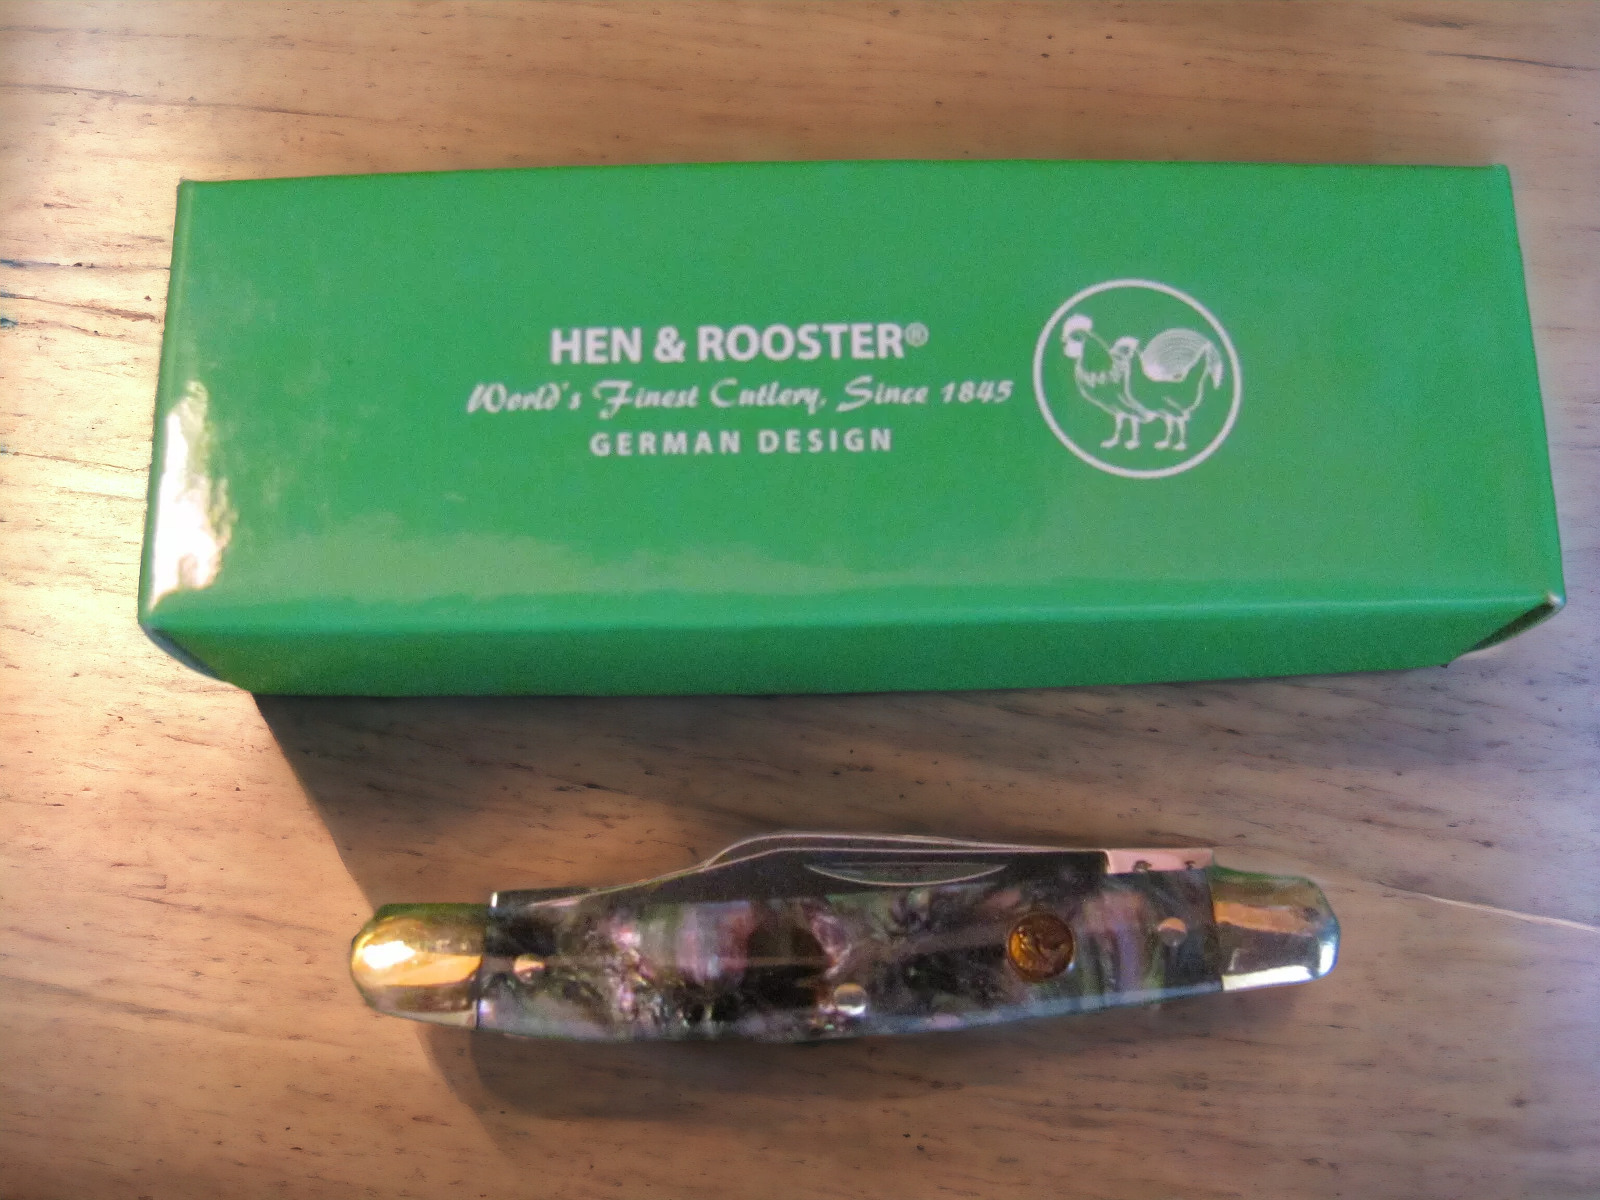 Hen & Rooster Abalone Mini Stockman & Pen Knife Gift Set 30321 IAB